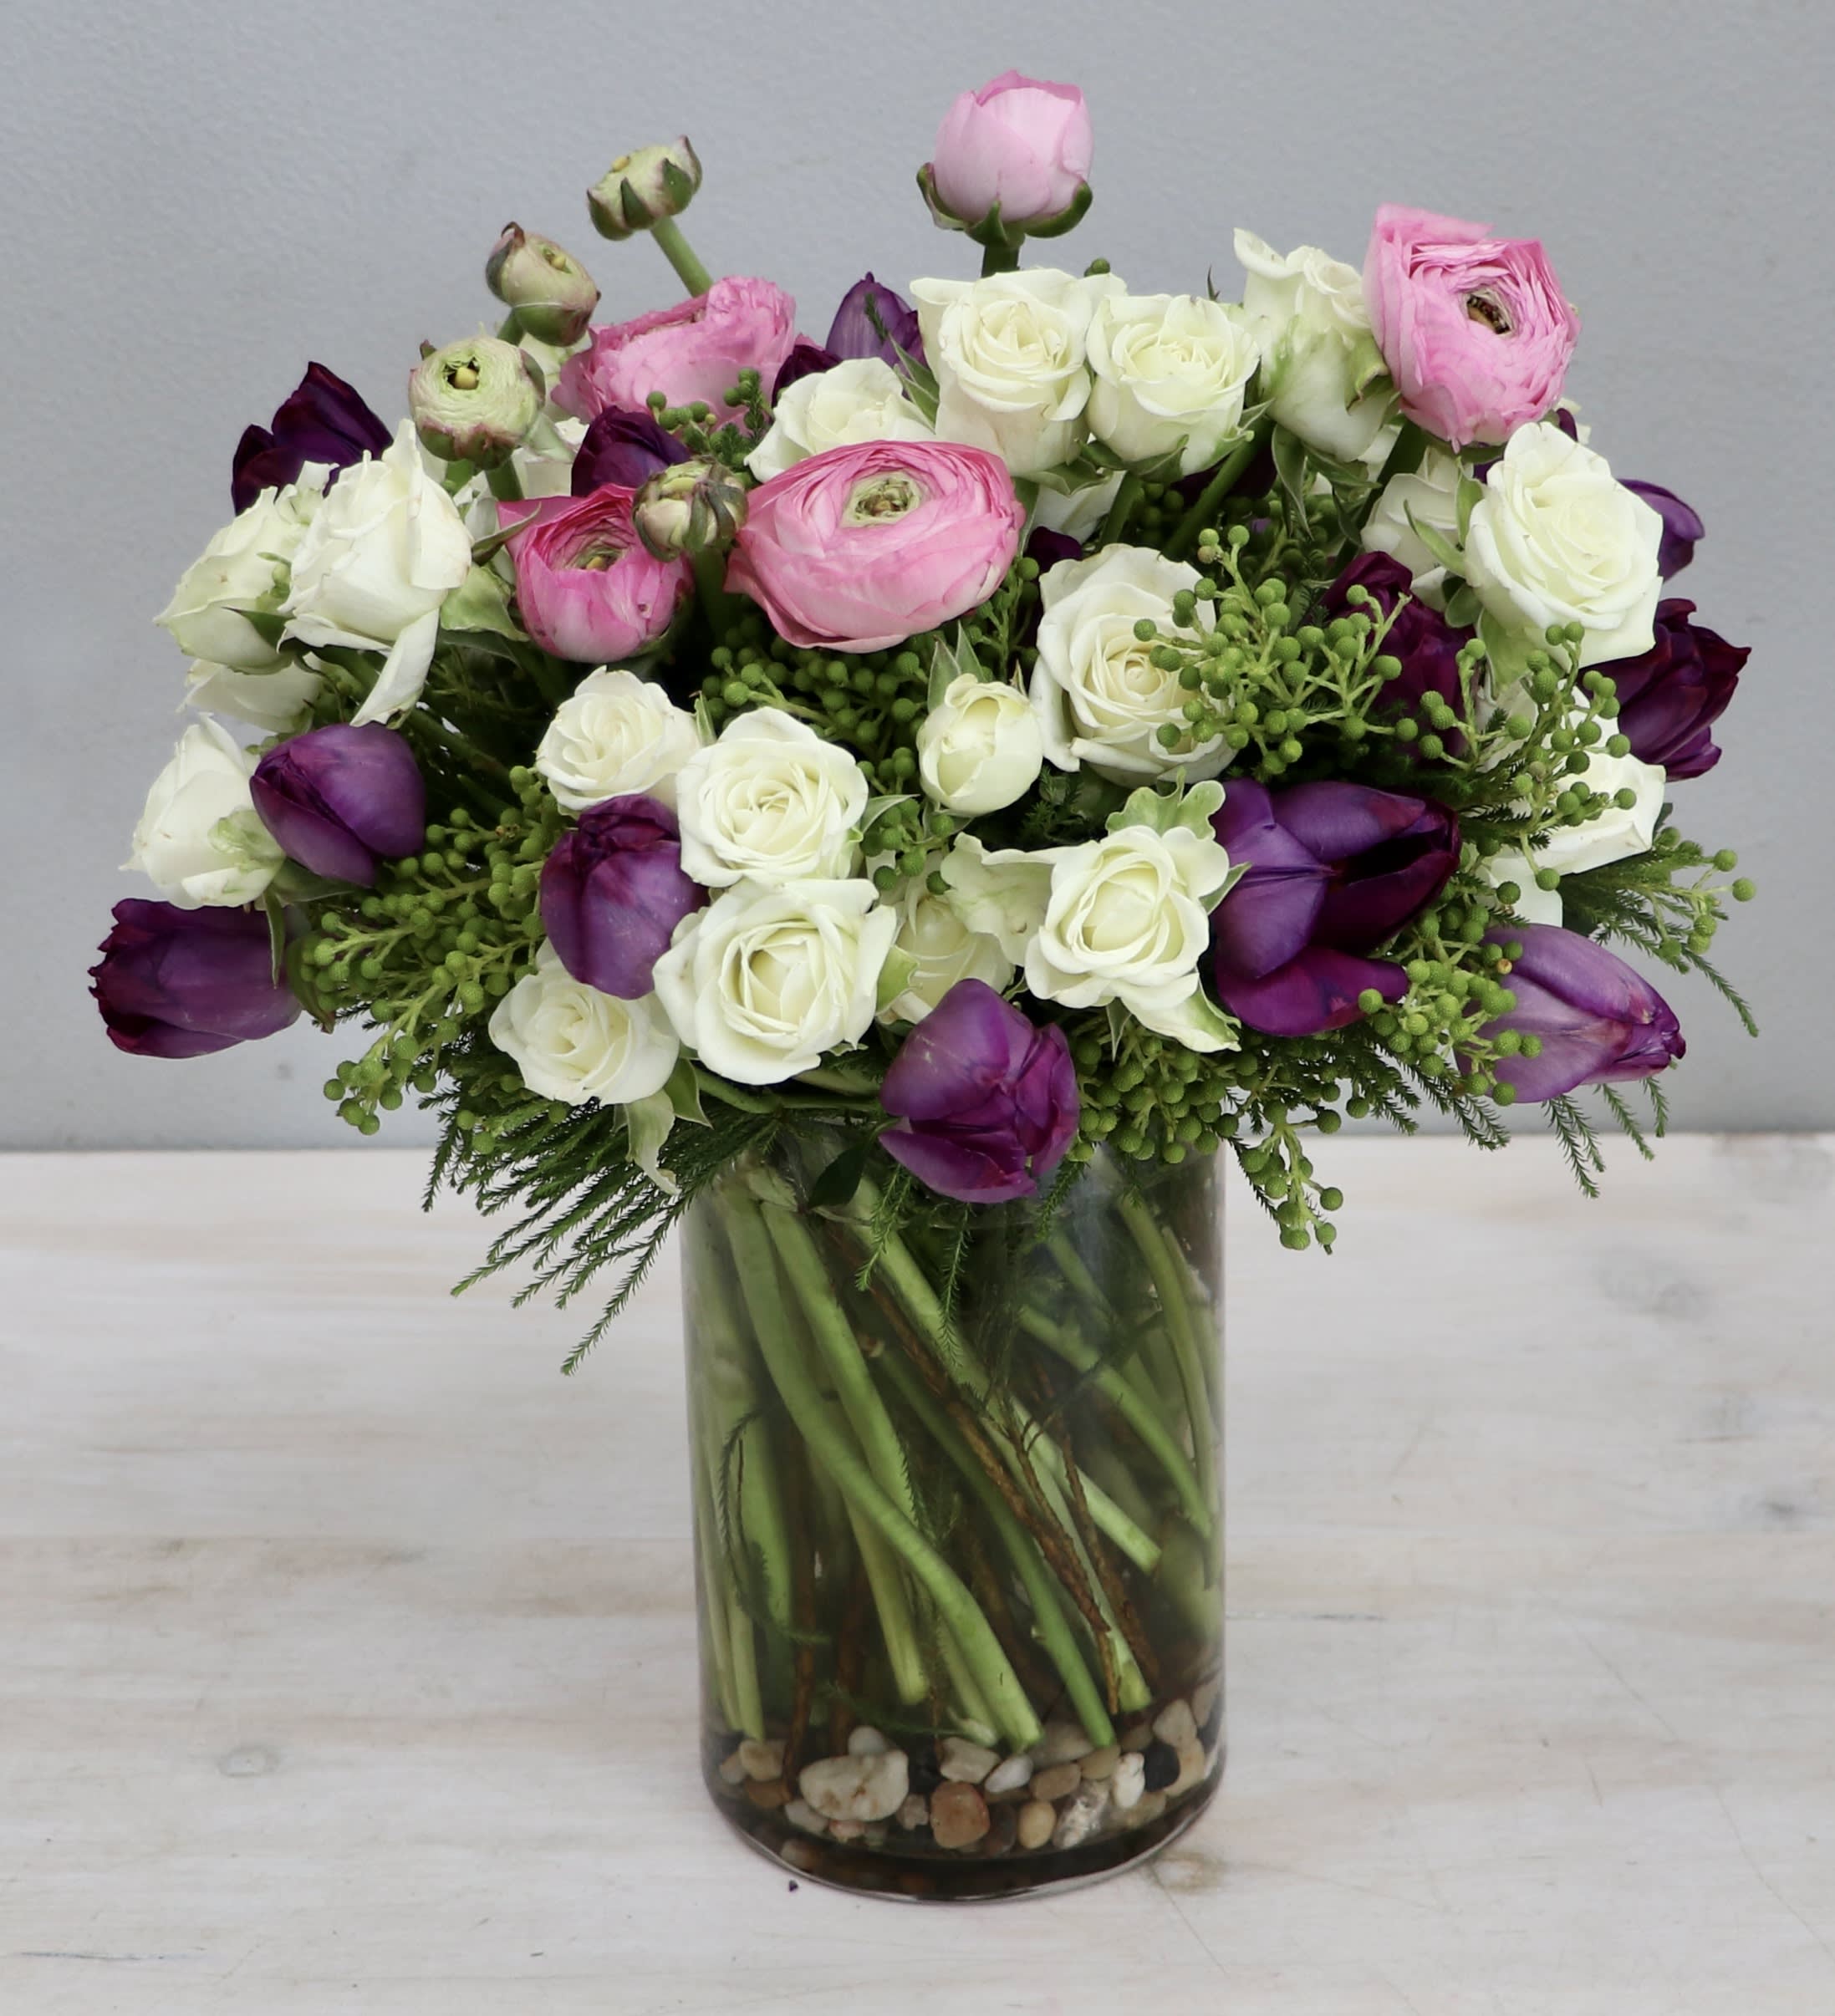 Simply Love - My Glendale Florist  - The arrangement features spray rose, ranunculus, and tulips for a sweet look. At standard size this arrangement is 12-14 inches tall and wide.